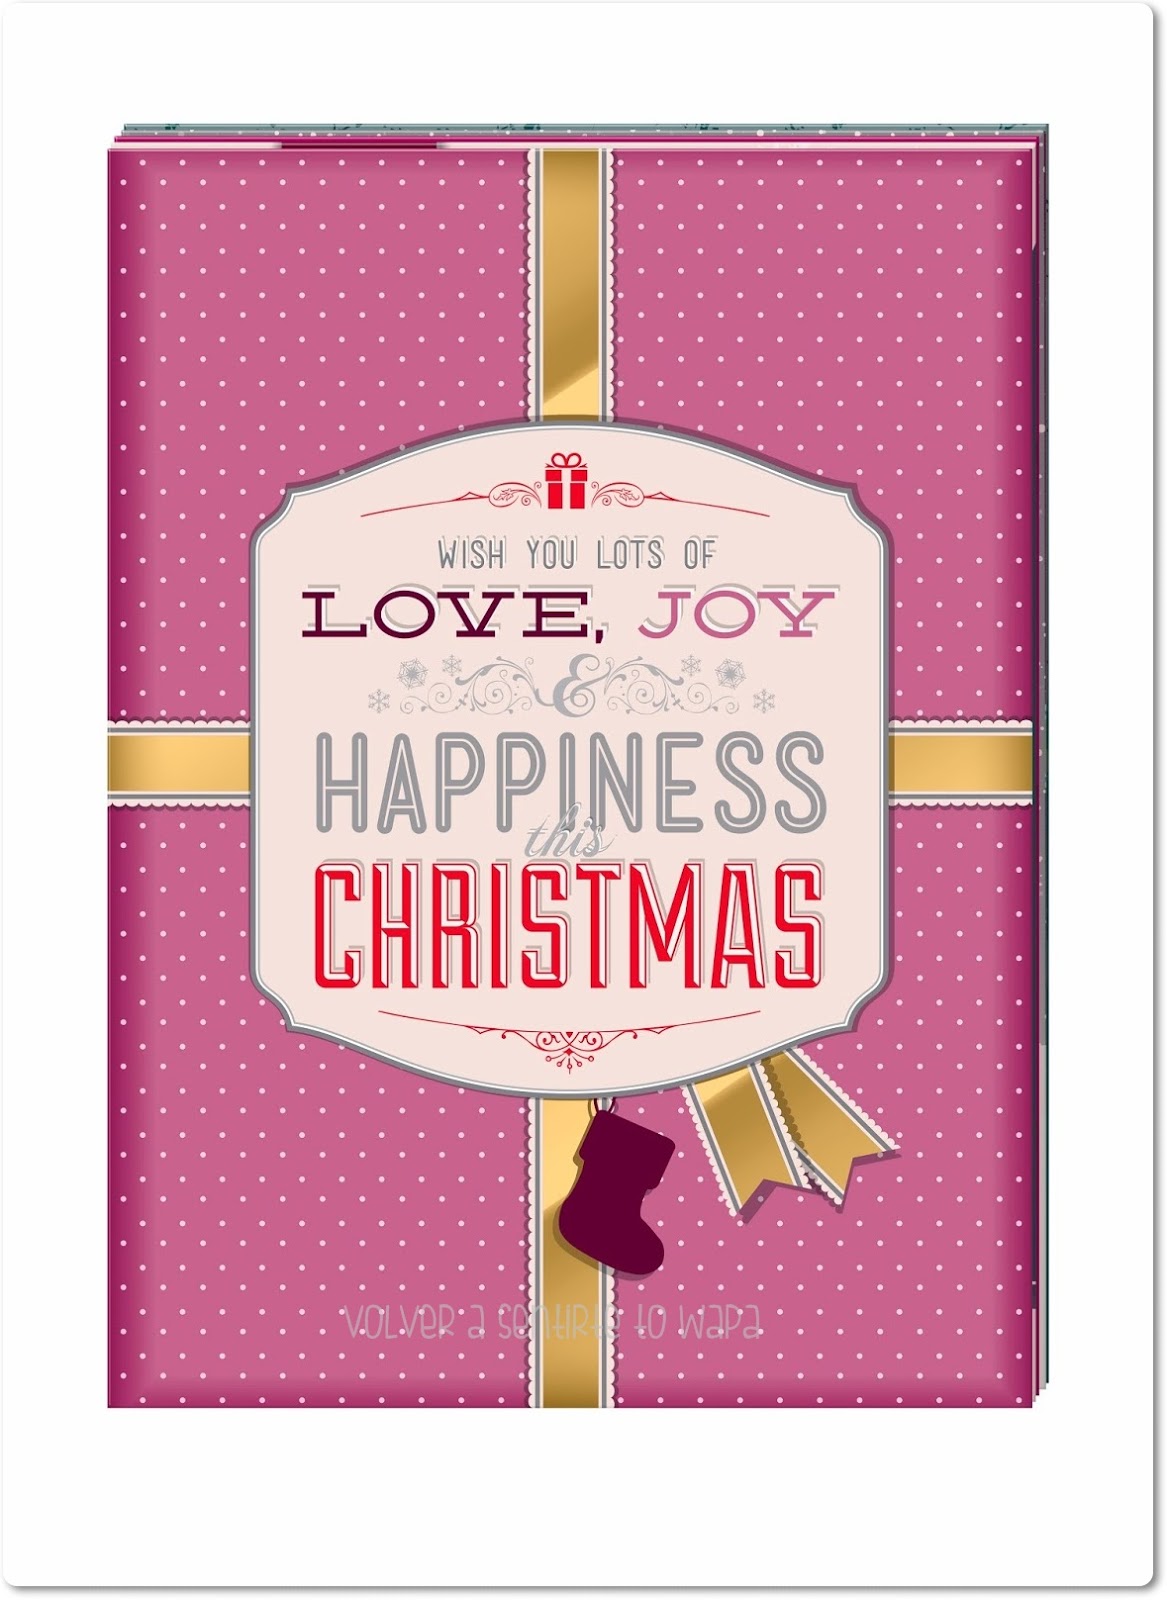 ESSENCE - Come to Twon {Noviembre 2014} - Greeting Cards